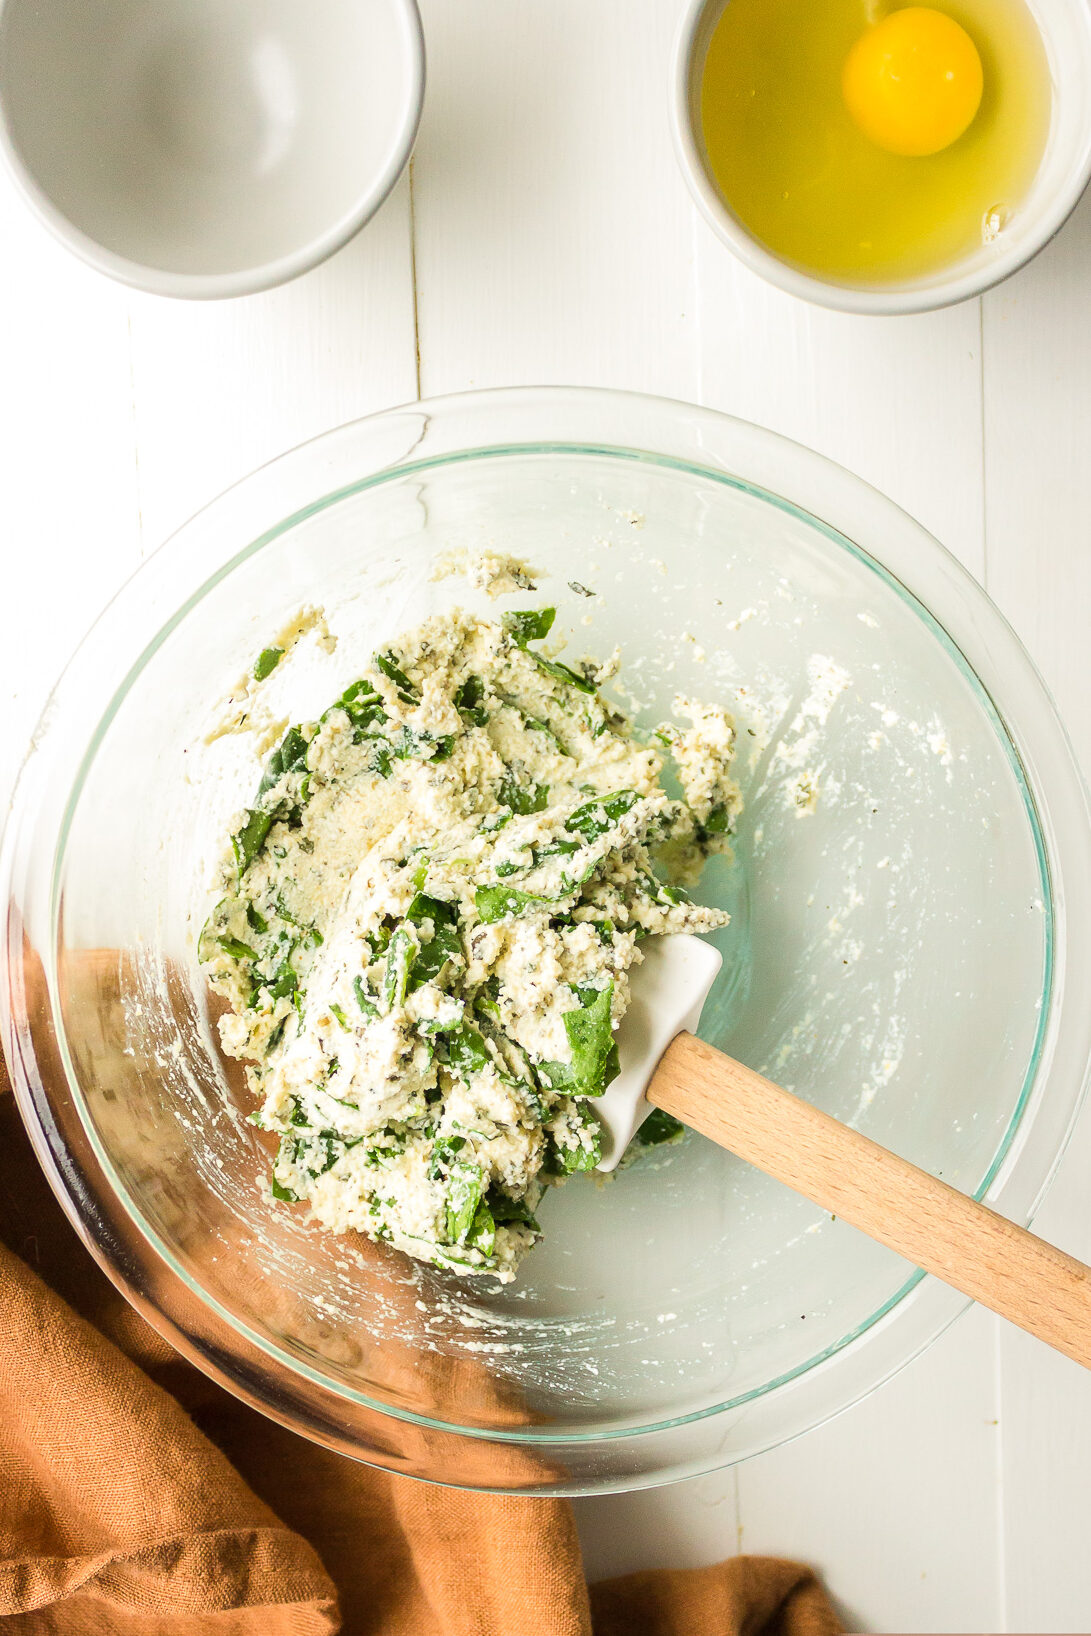 Spinach and ricotta cheese after mixing in a large mixing bowl.